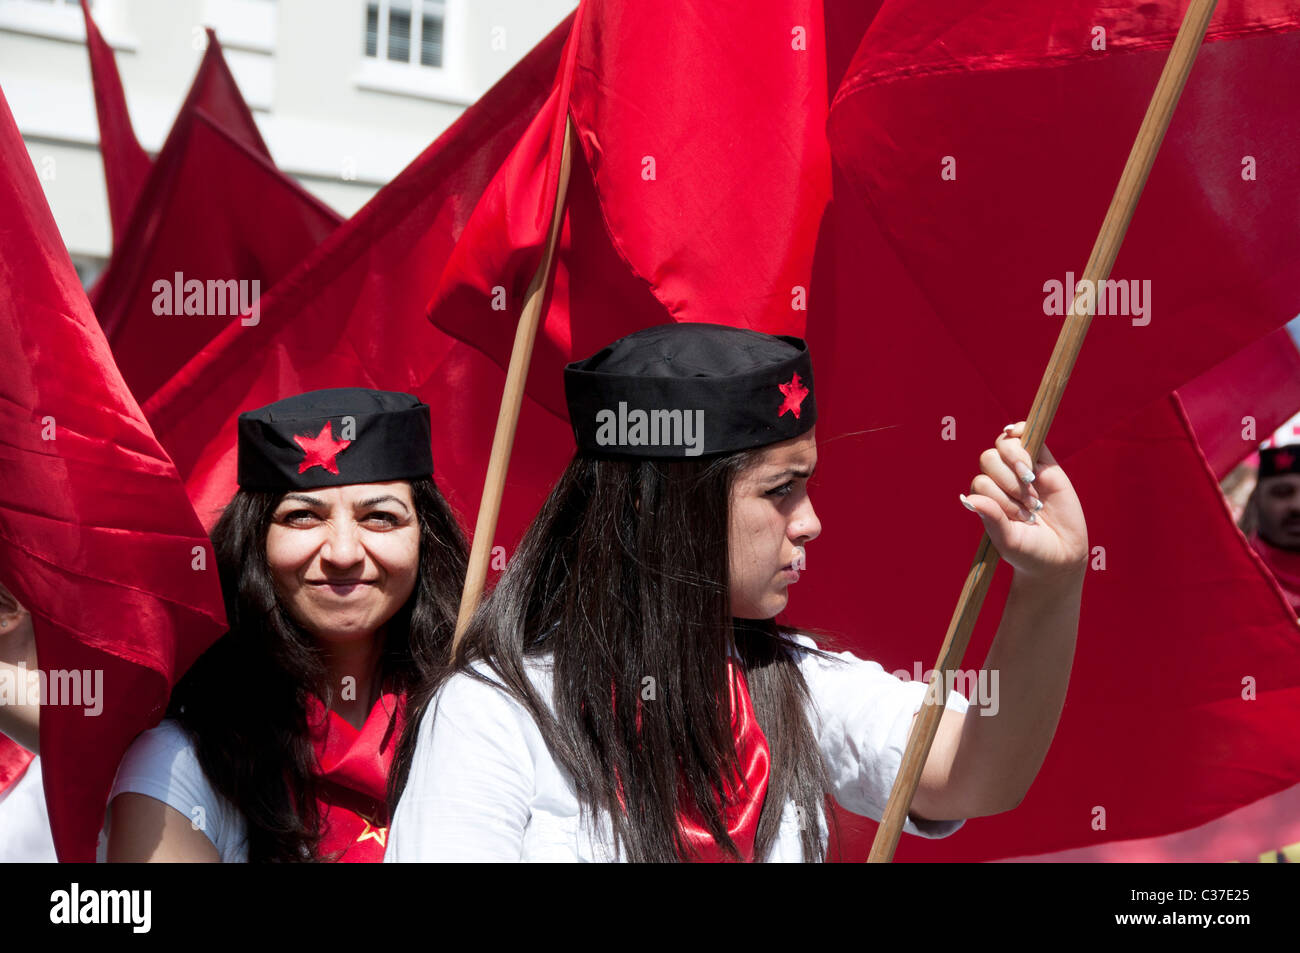 May 1st 2011. May Day demonstration Clerkenwell Green. Two young women from Turkish Kurdish community holding red flags Stock Photo